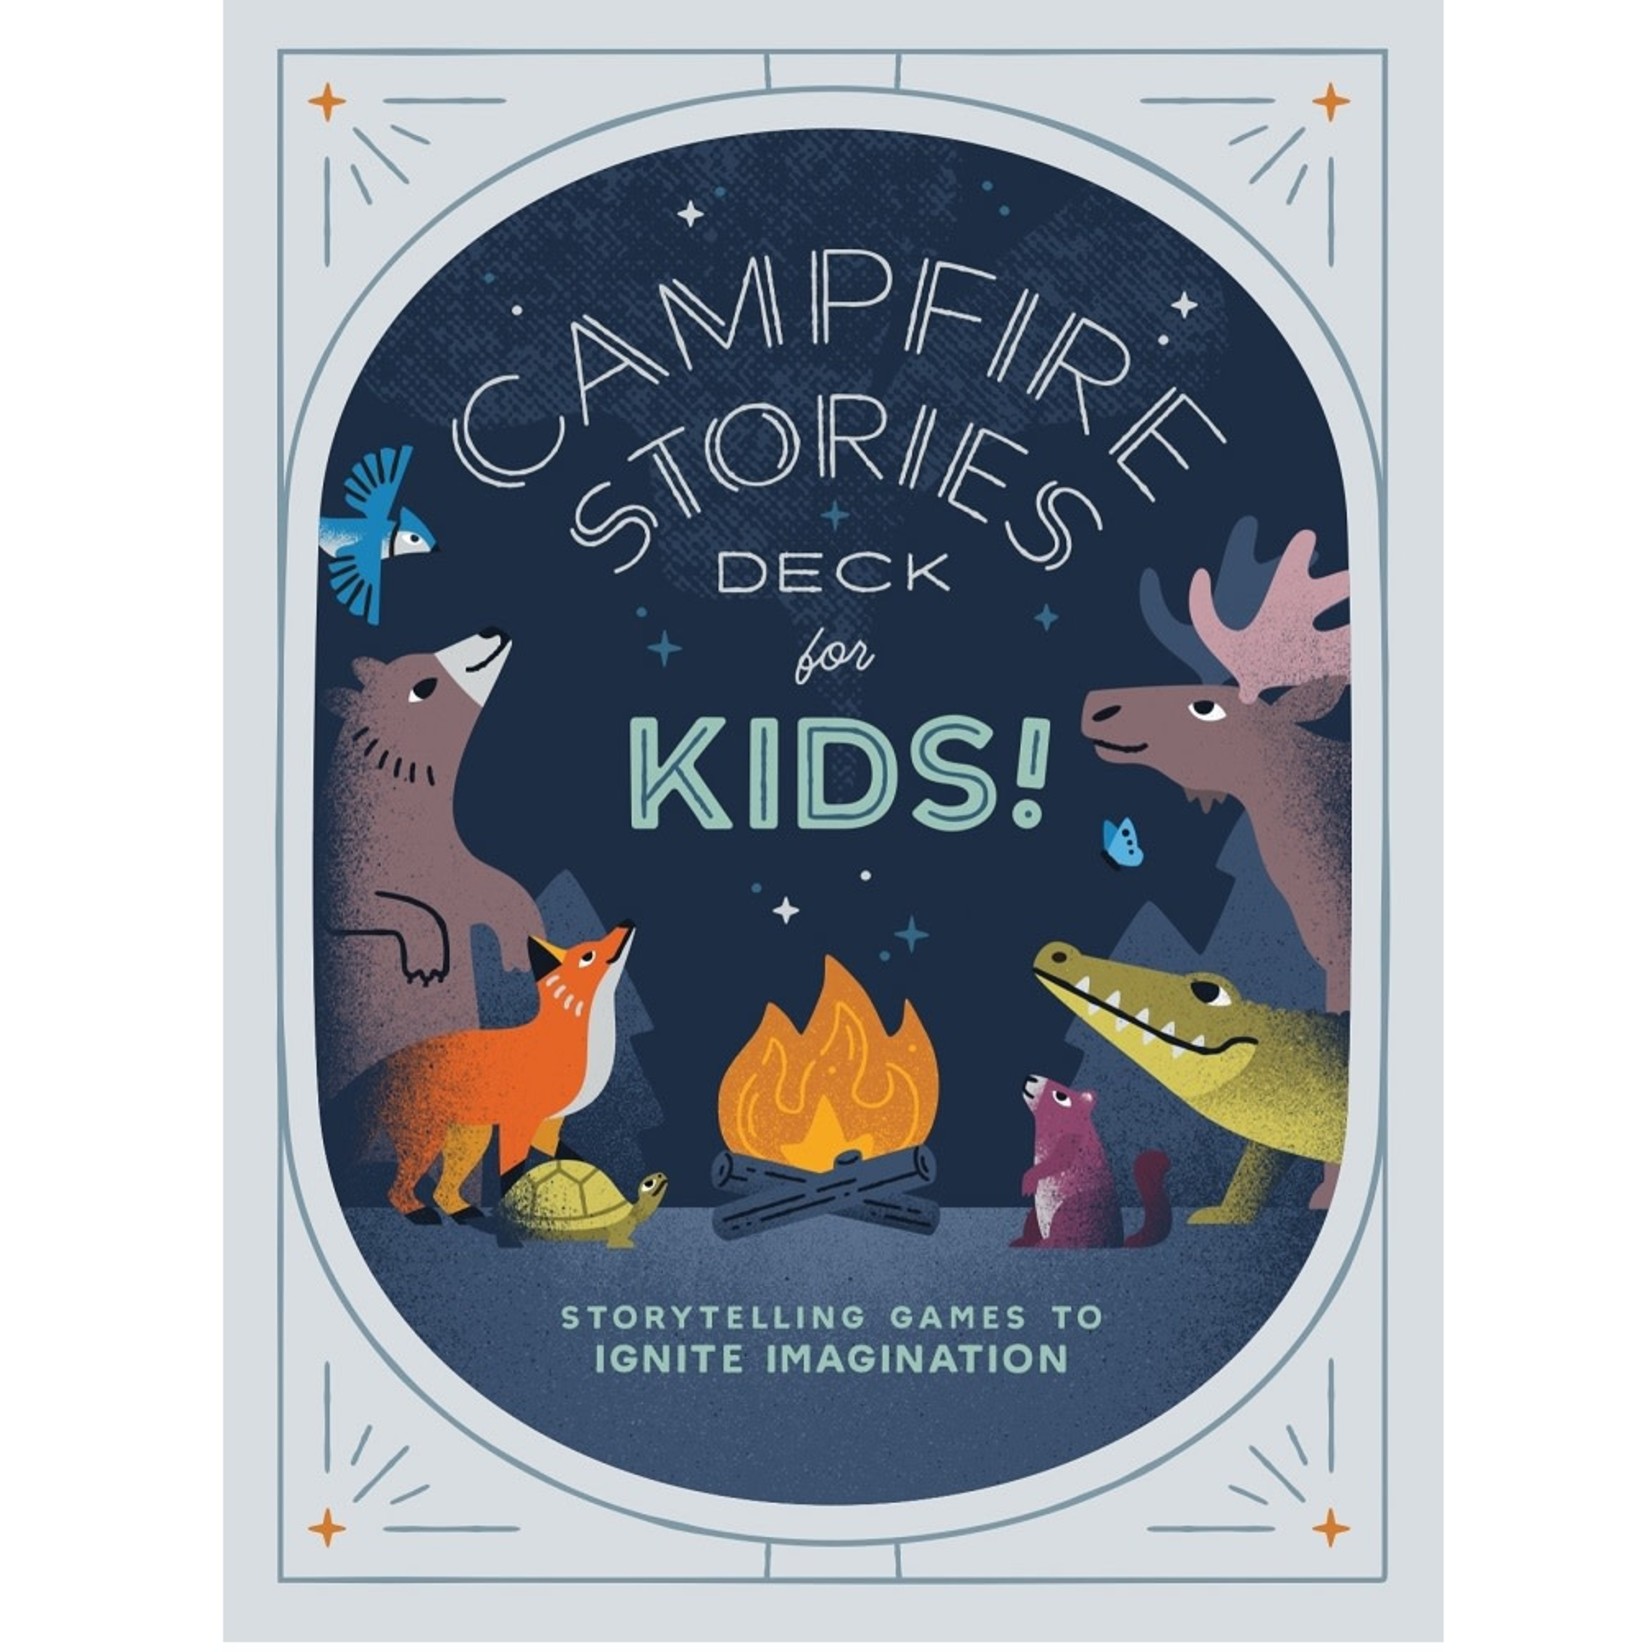 Games Campfire Stories Deck For Kids